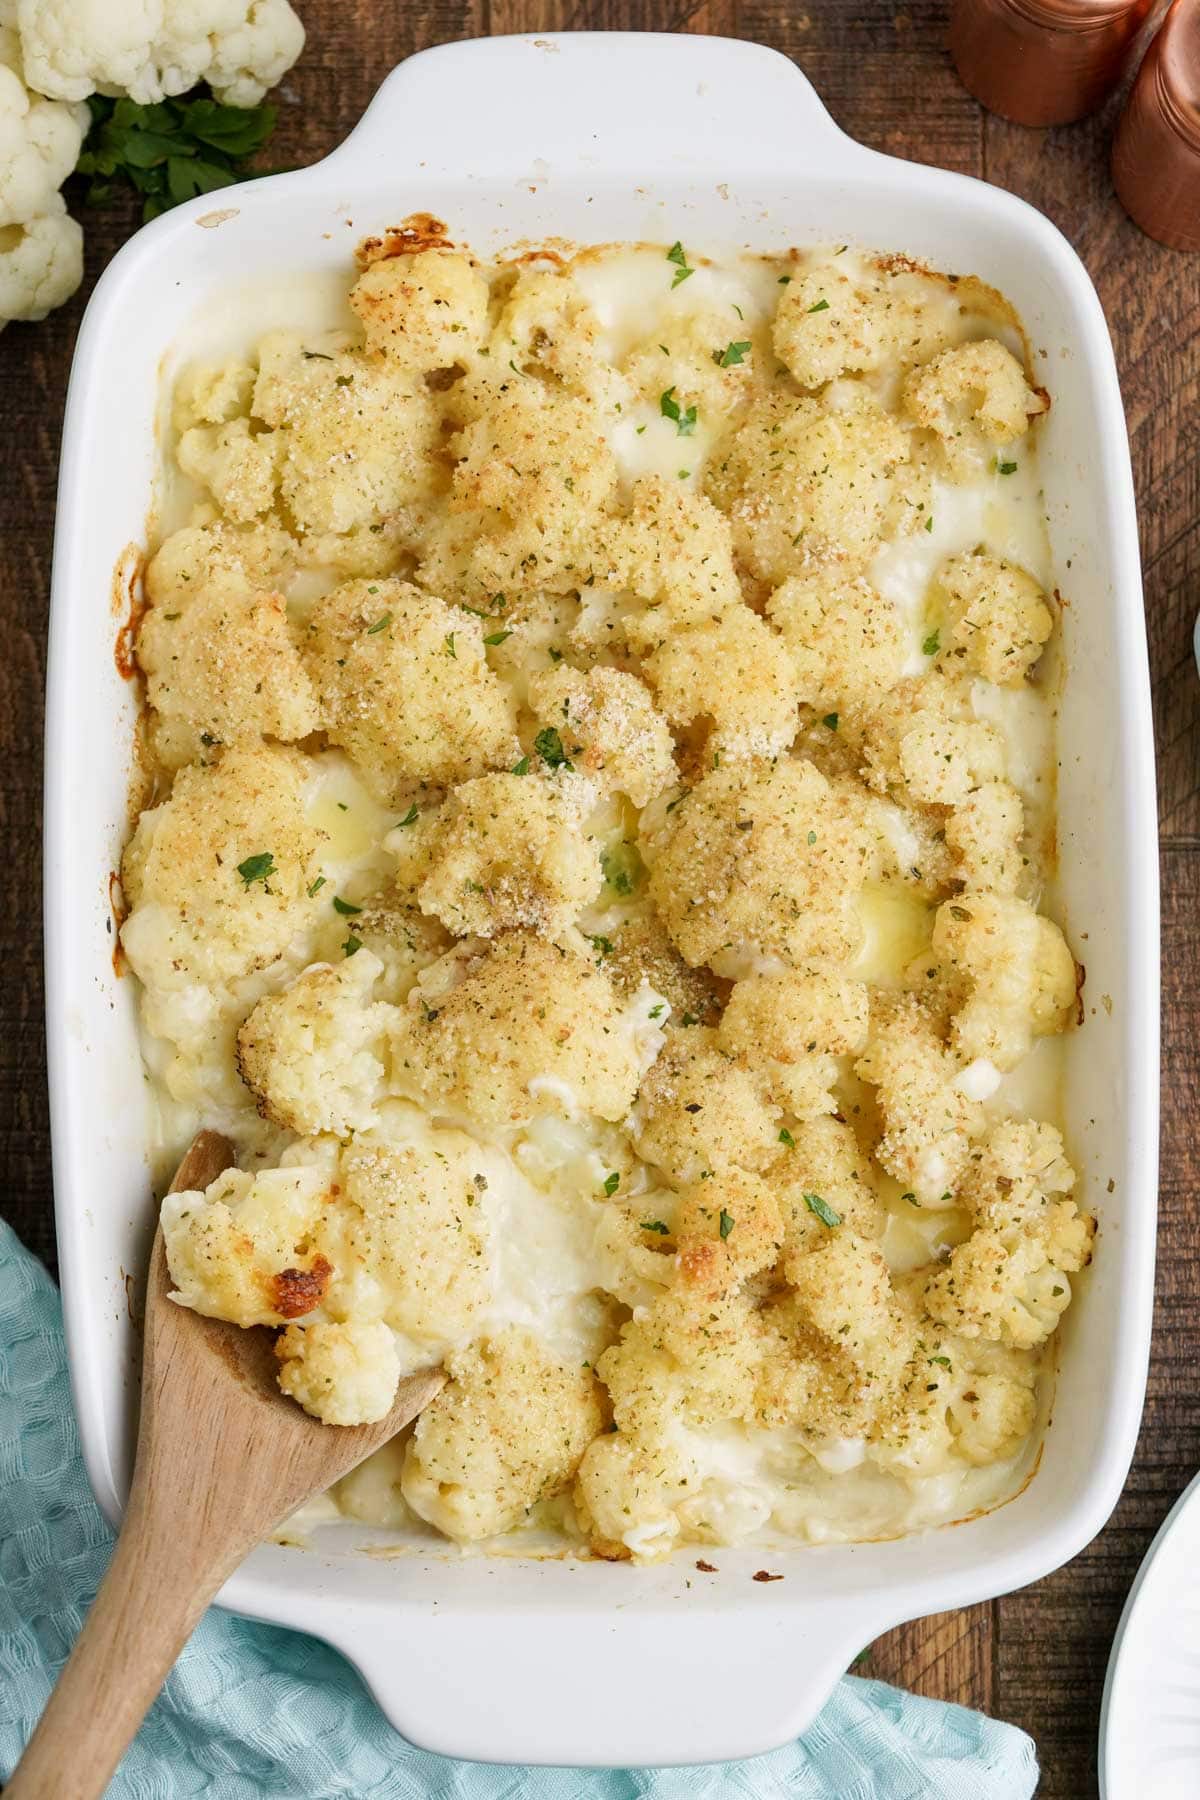 Baked cauliflower in cheese sauce with breadcrumbs and a wooden spoon.